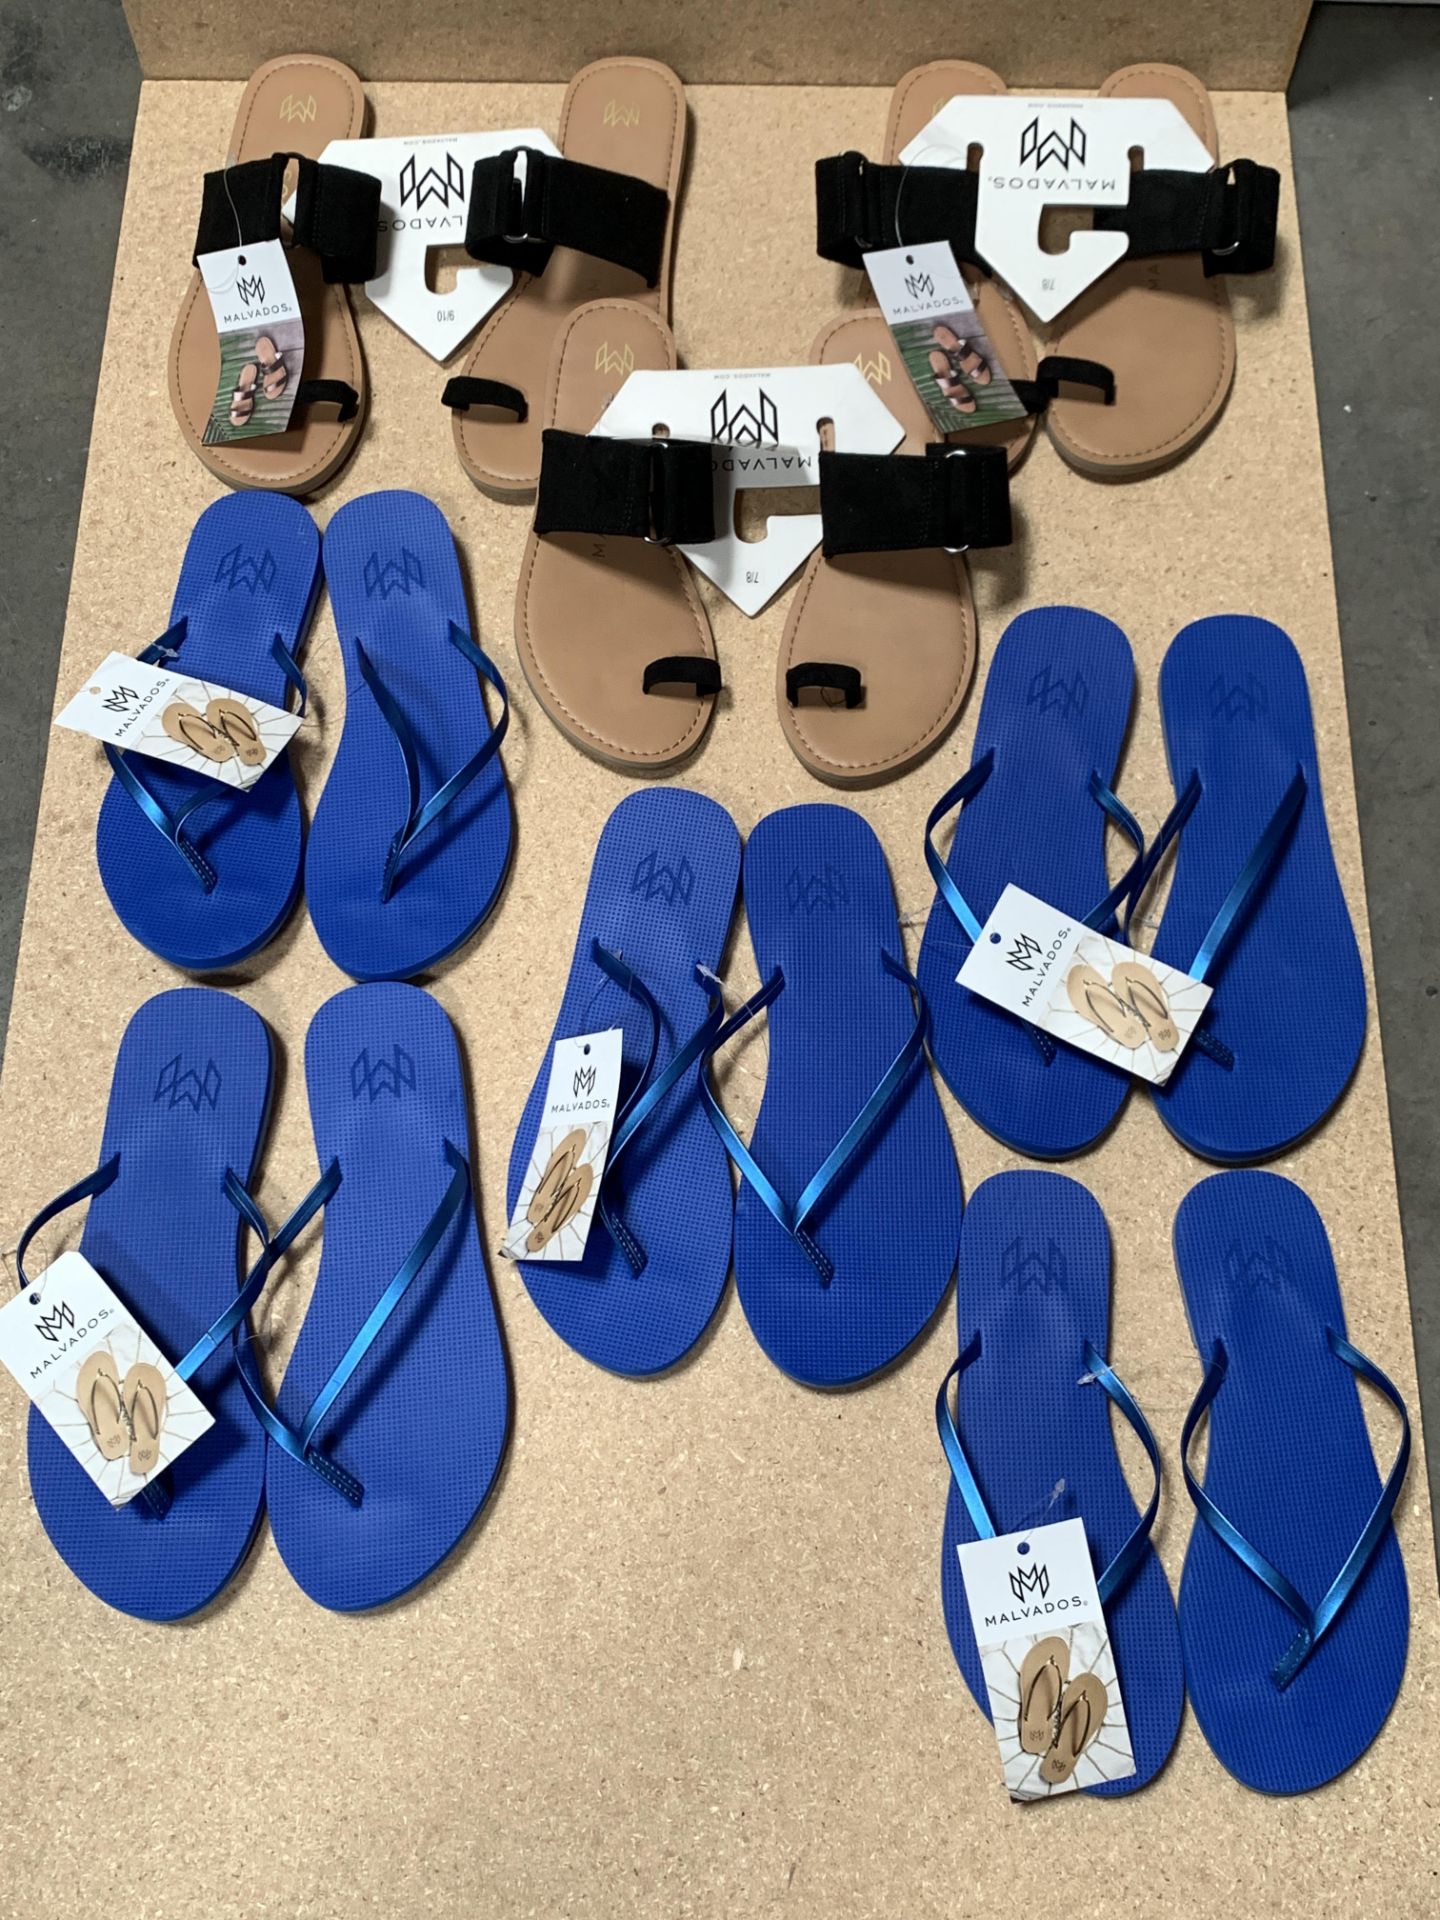 8 Pairs Malvados Flip Flip Sandals, New, Various Sizes. Lux Grace and Icon Tori (Retail Value $337) - Image 2 of 8